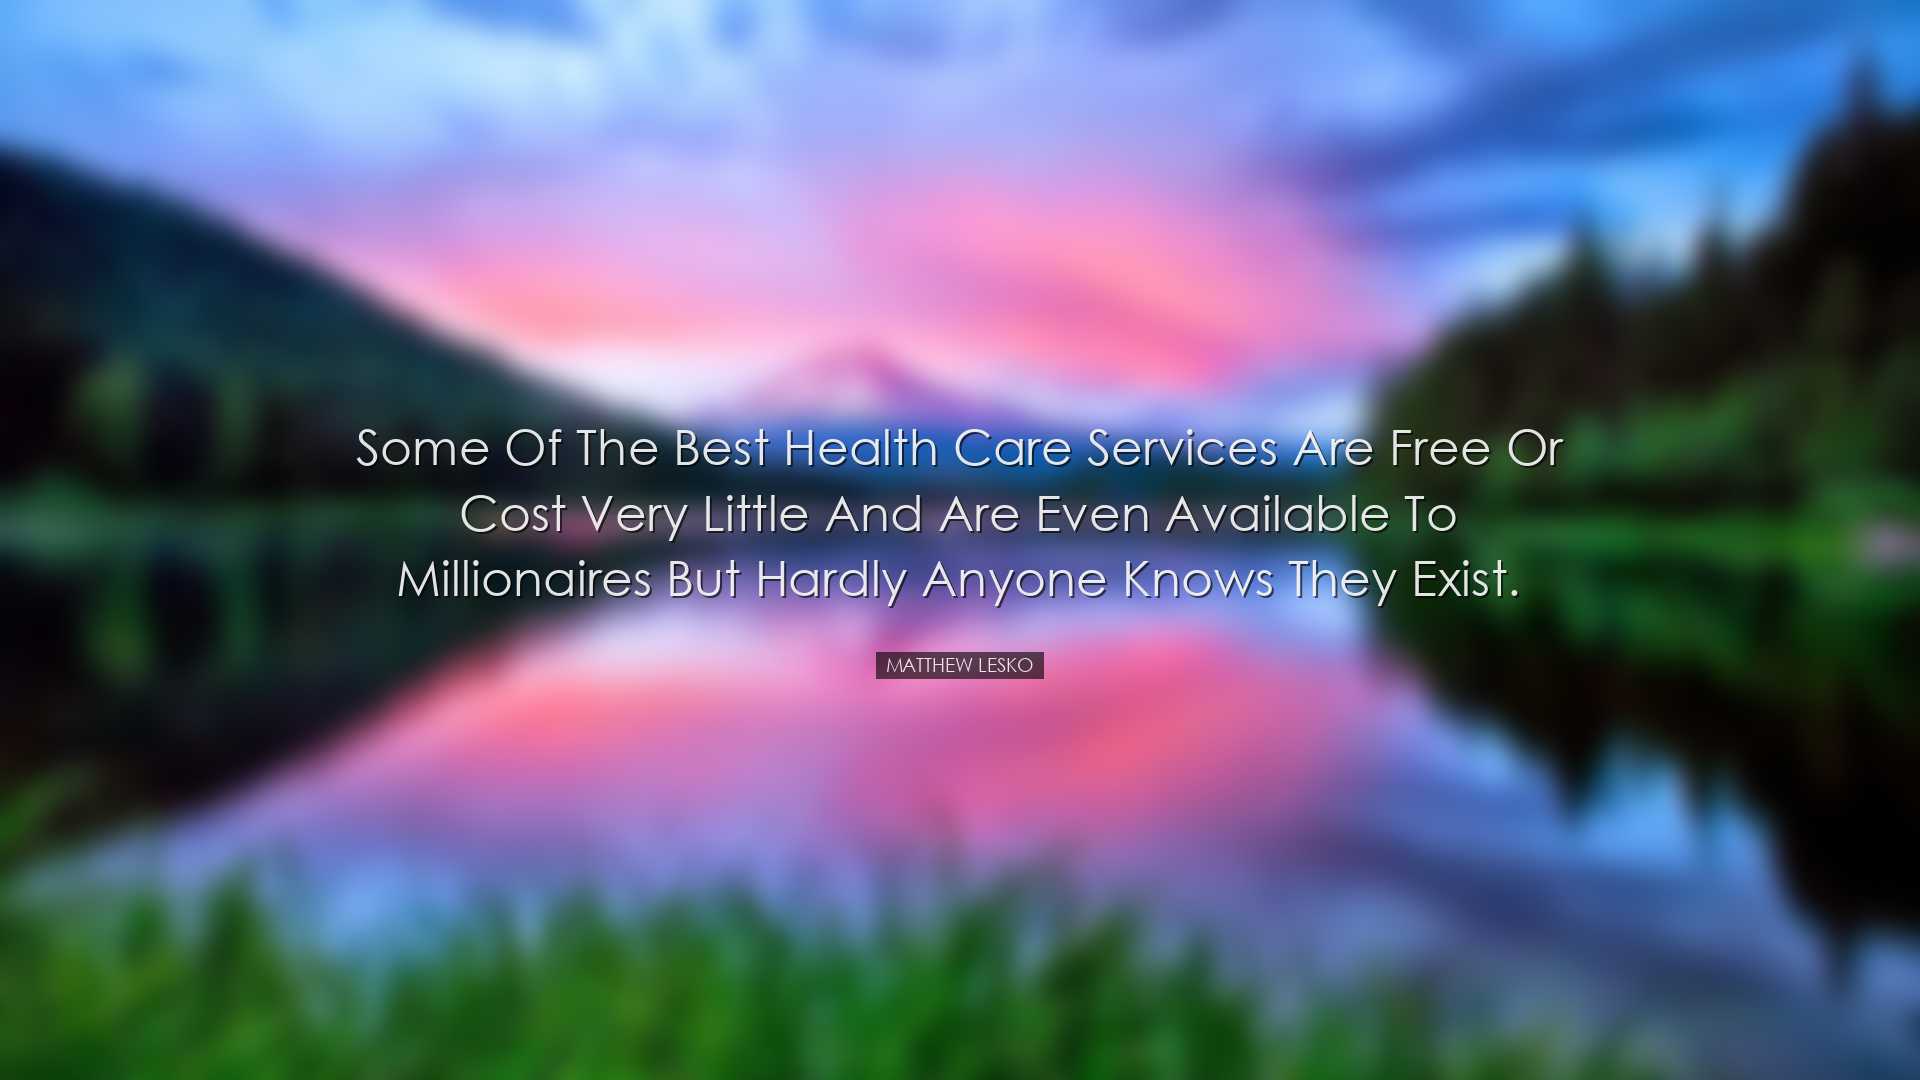 Some of the best health care services are free or cost very little